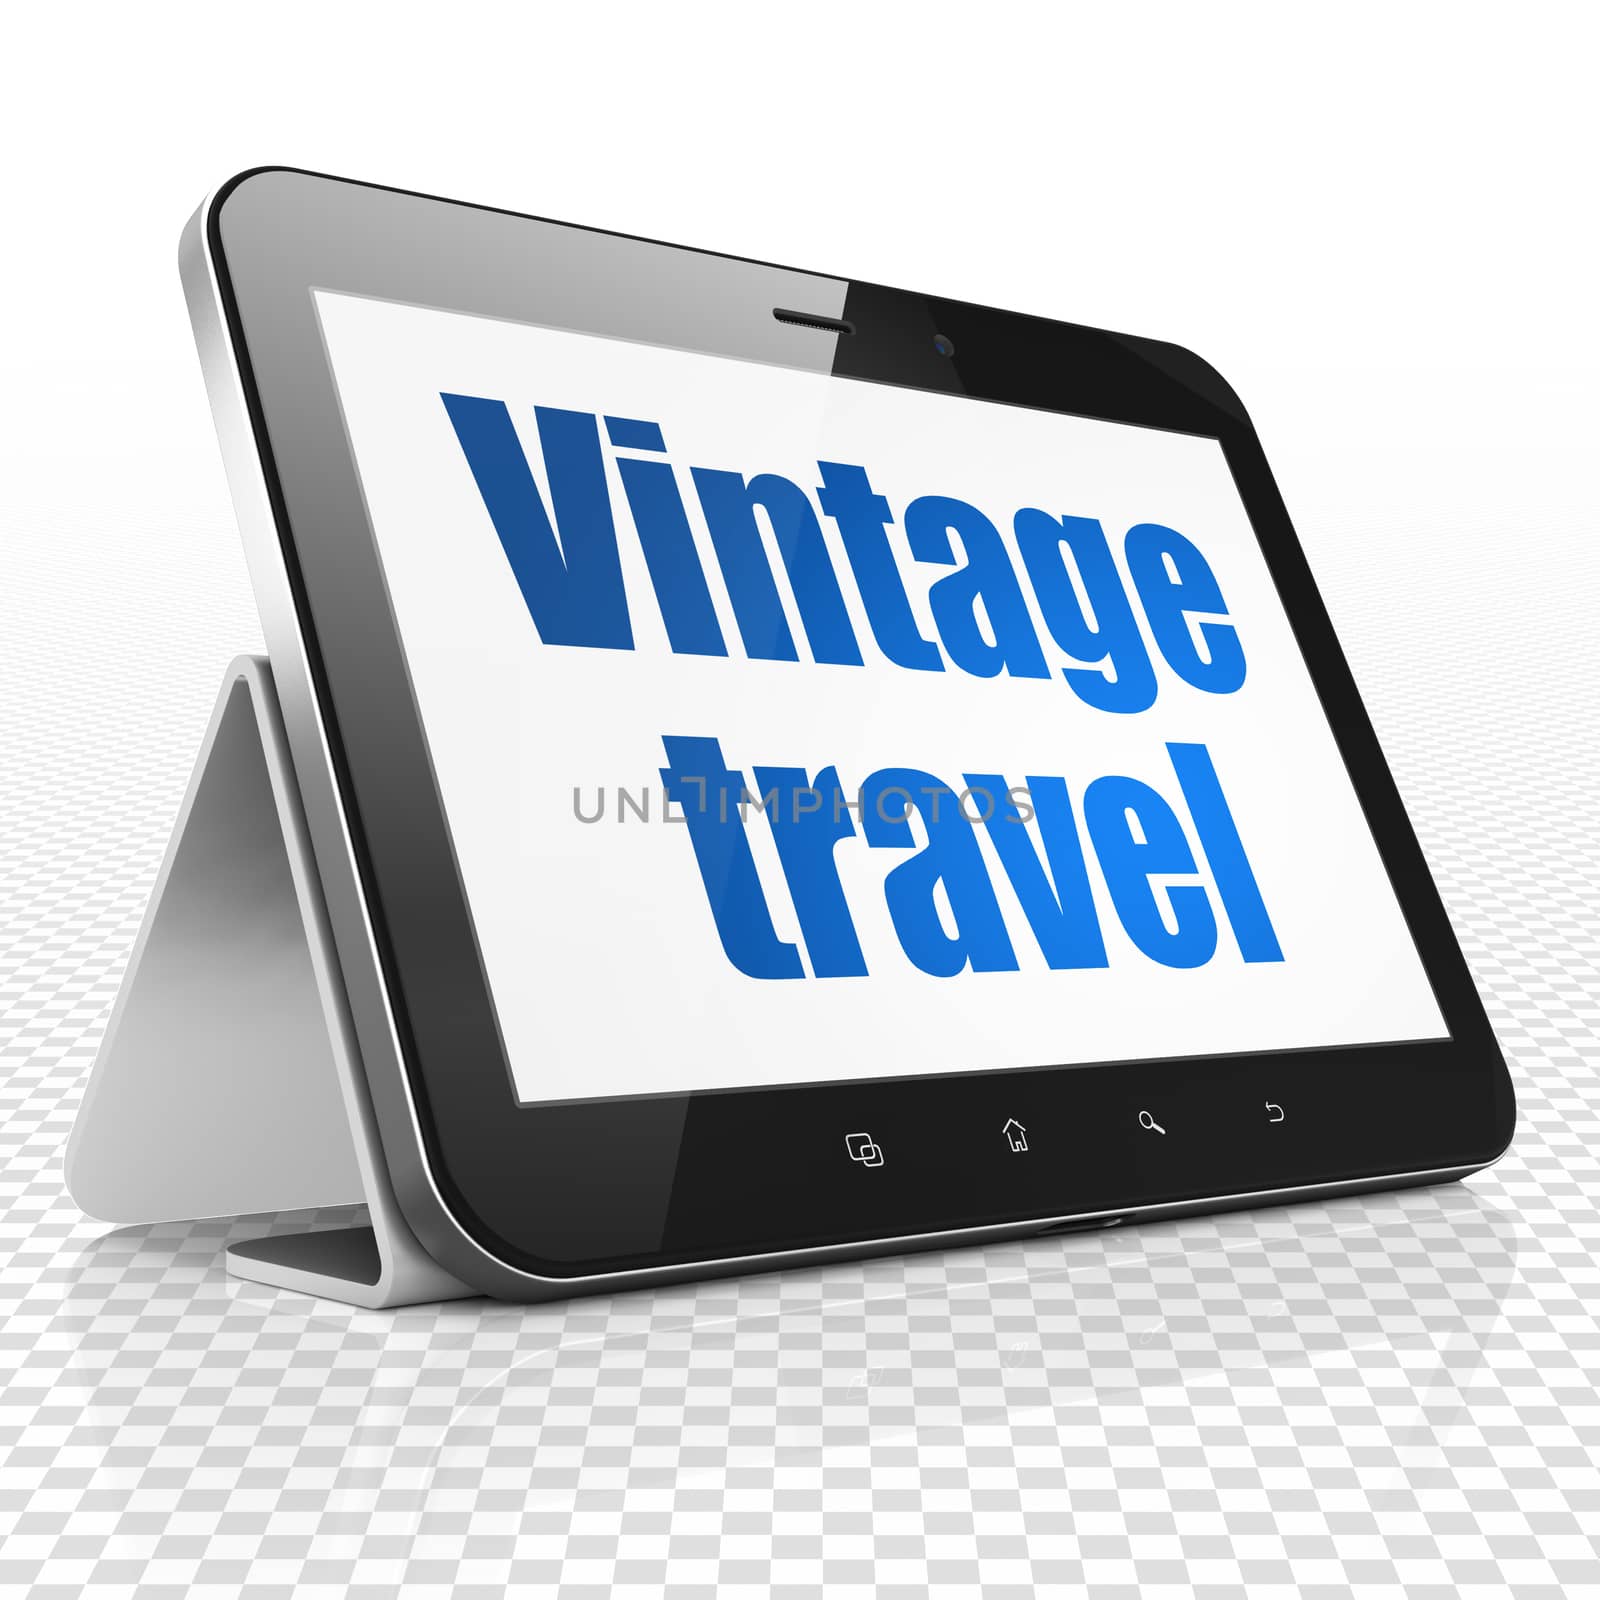 Vacation concept: Tablet Computer with Vintage Travel on display by maxkabakov